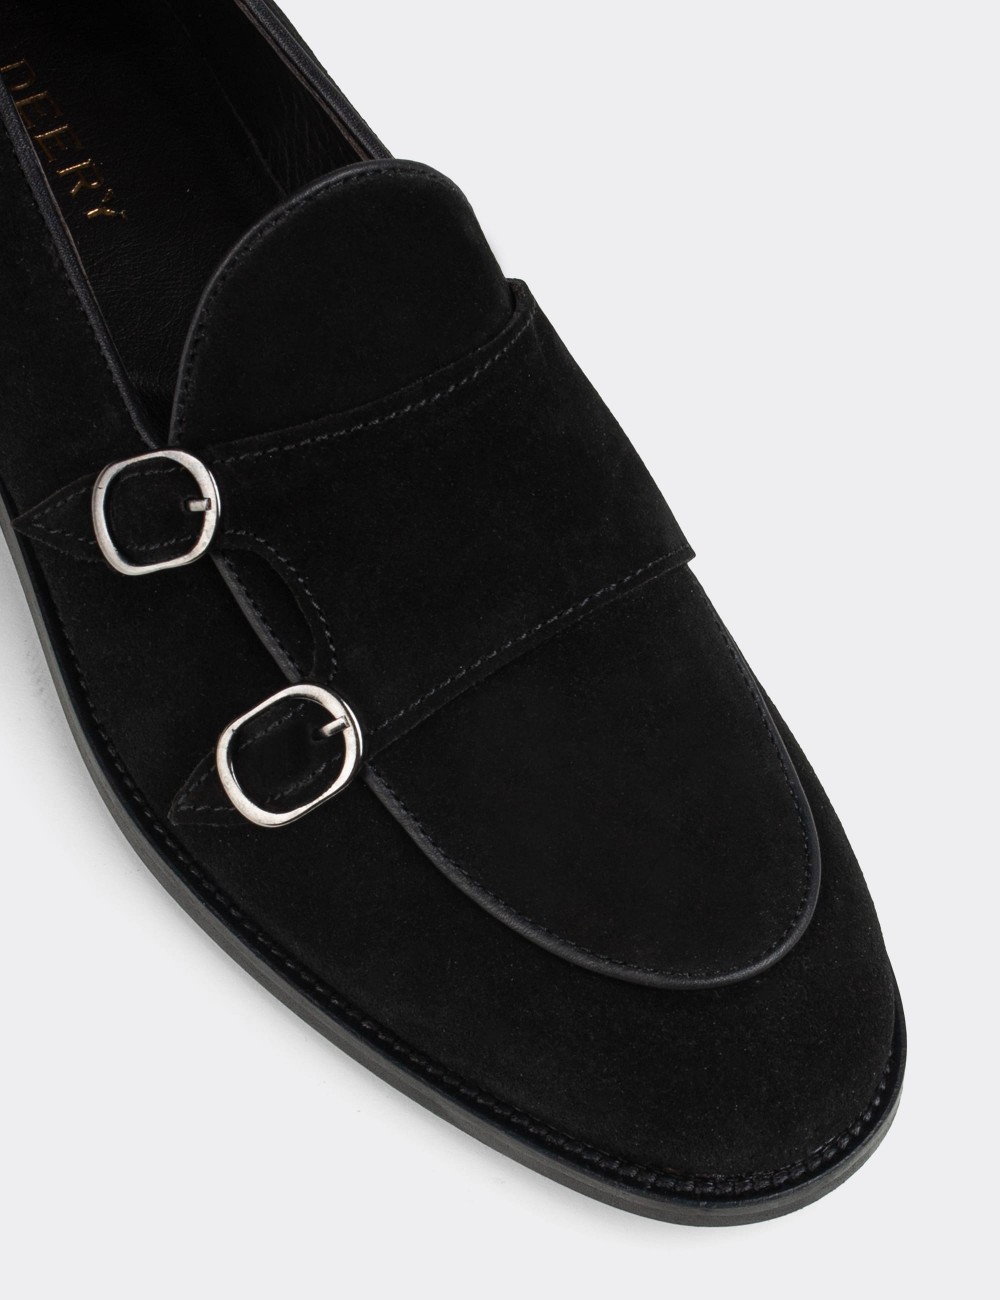 Black Suede Leather Double Monk-Strap Loafers - 01844MSYHN02